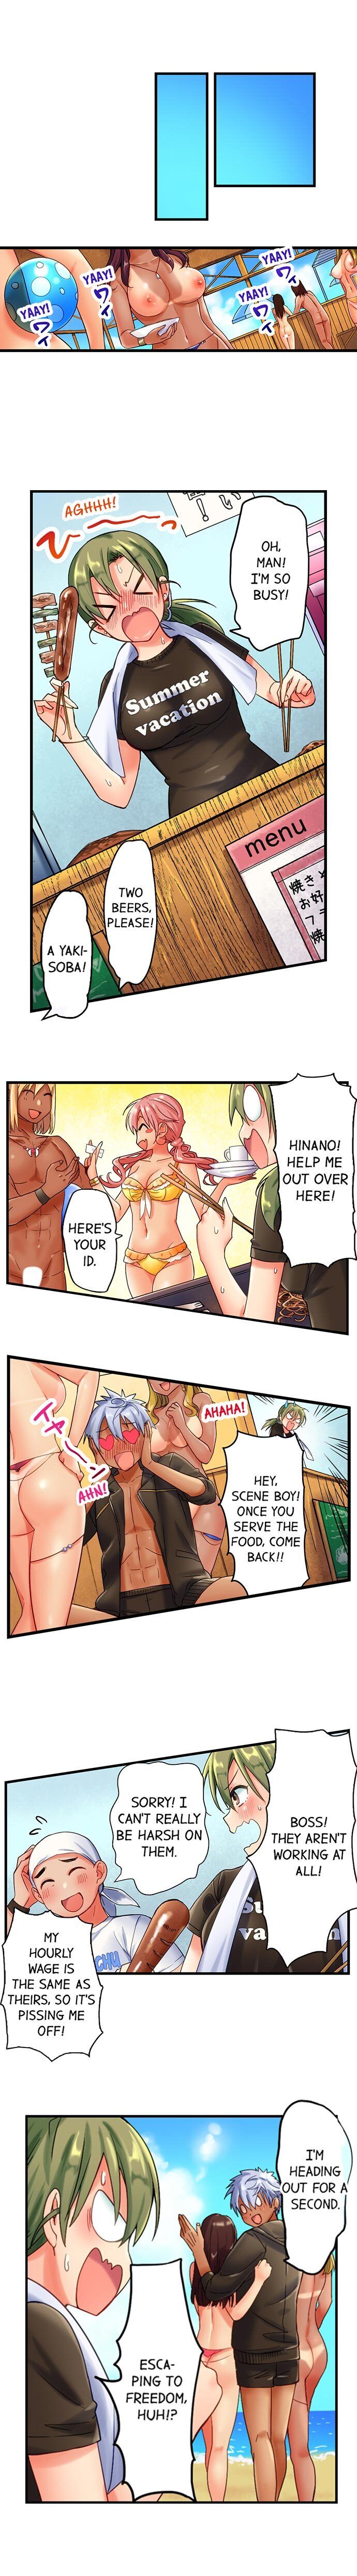 A Chaste Girl’s Climax at a Nudist Beach - Chapter 2 Page 2